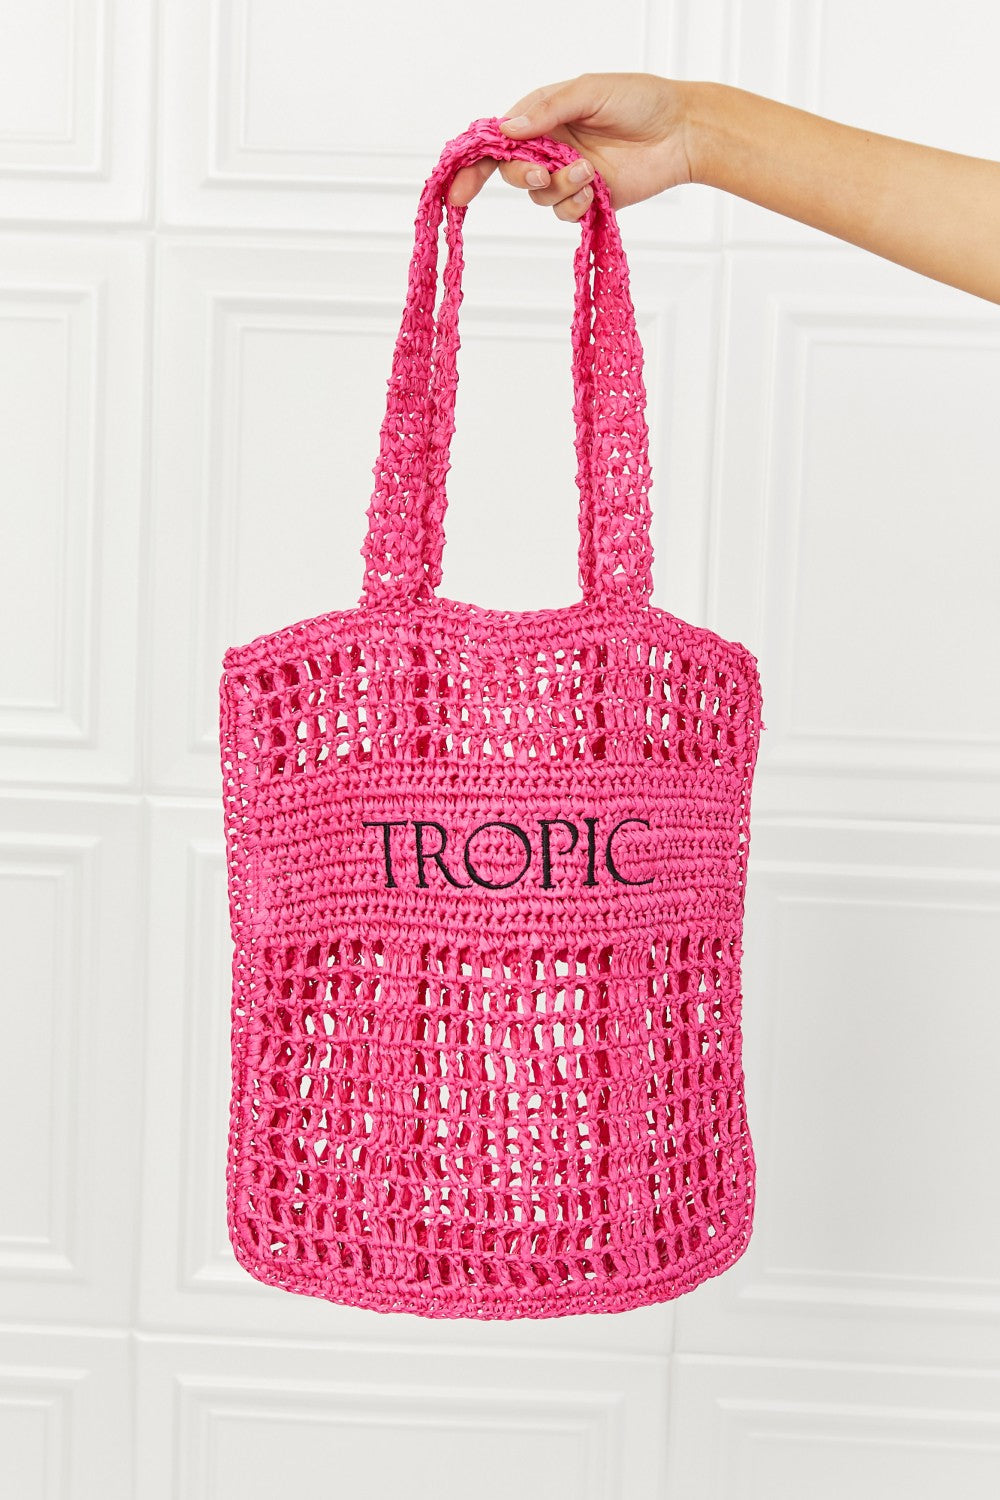 Hot Pink Straw Tote Bag - The Exclusive Emerald